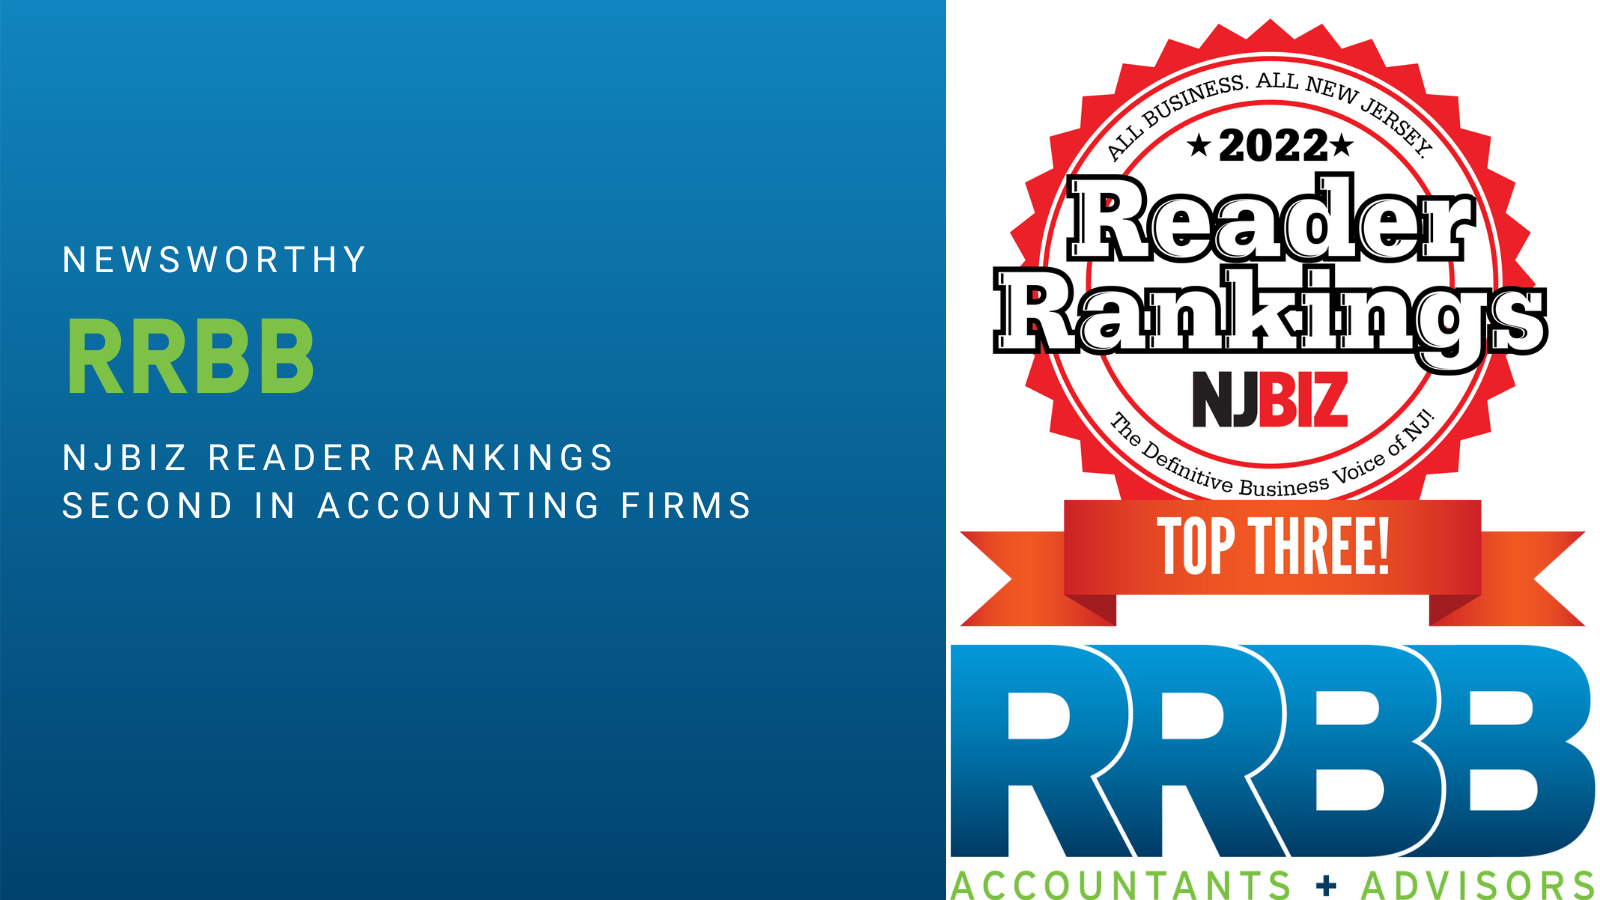 RRBB Voted Second in NJBIZ 2022 Reader Rankings for Accounting Firms Image